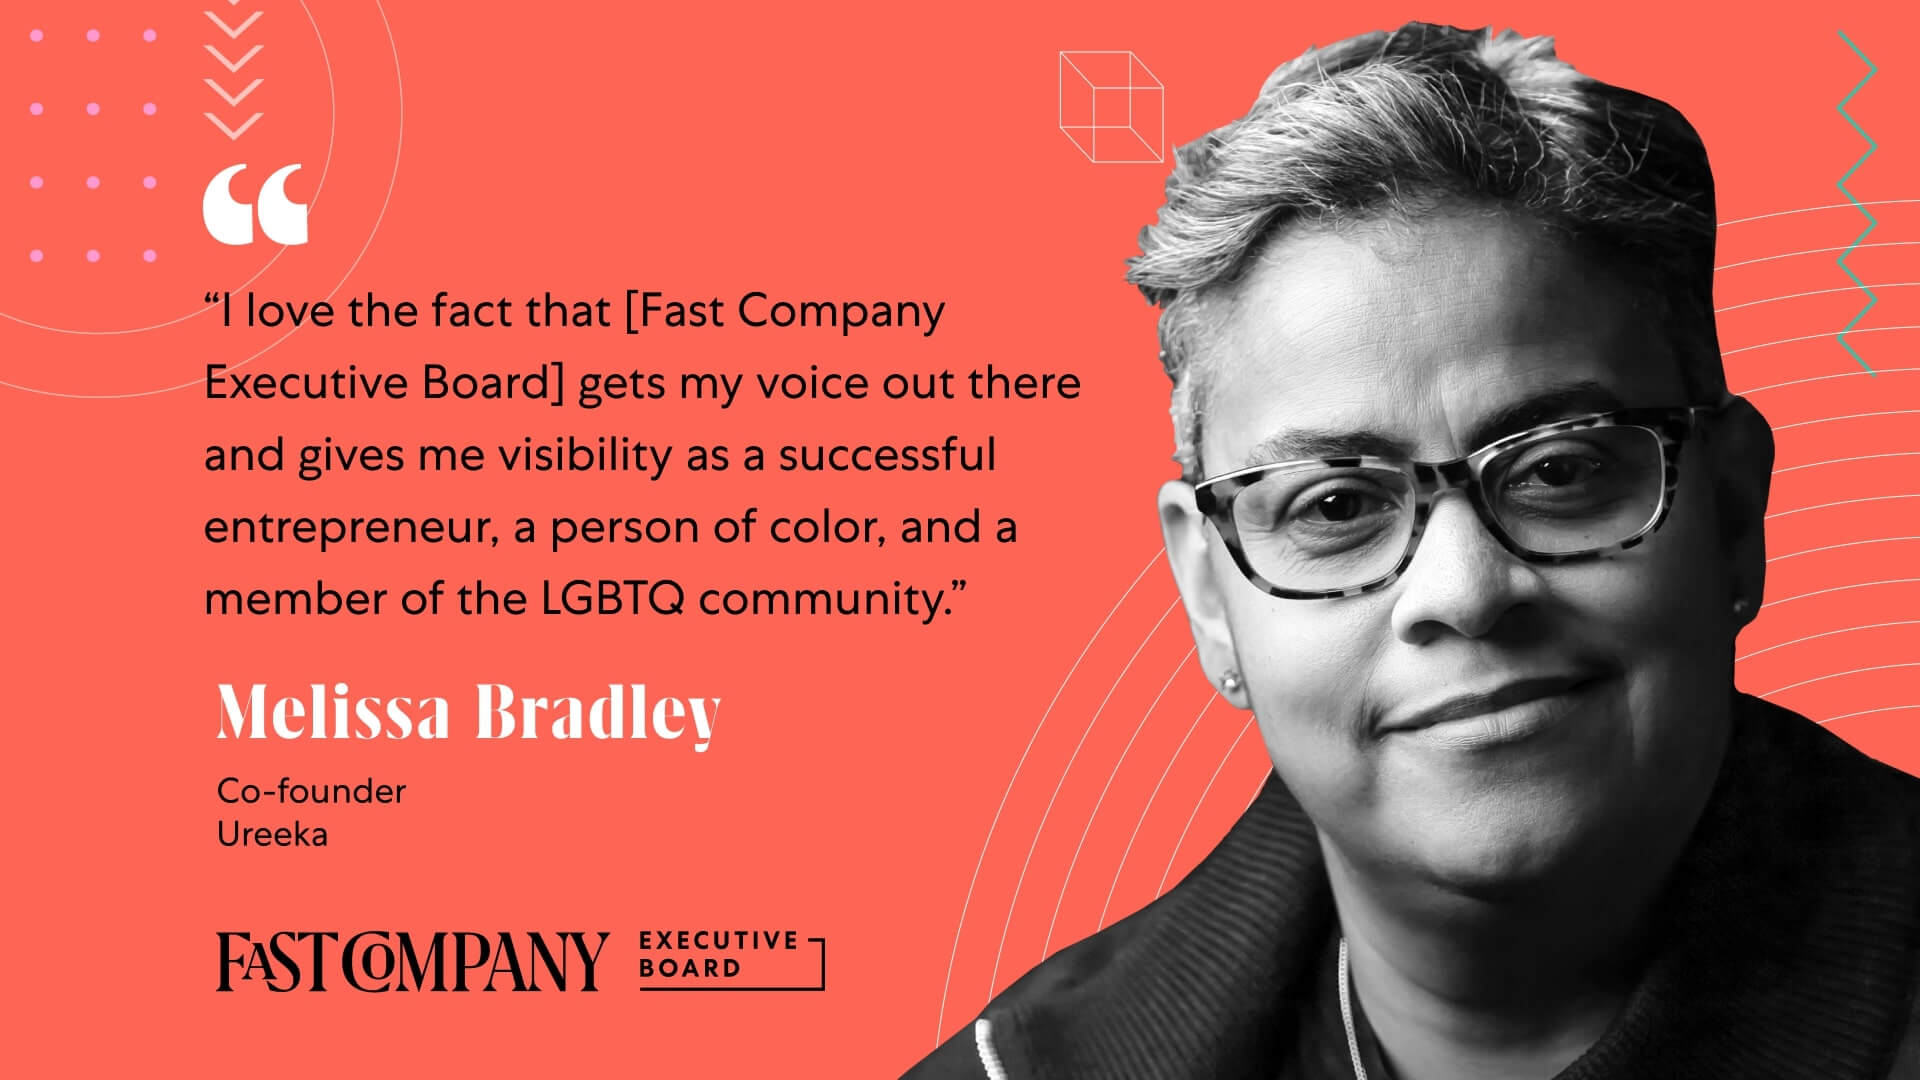 Fast Company Executive Board Helps Melissa Bradley Amplify Her Voice